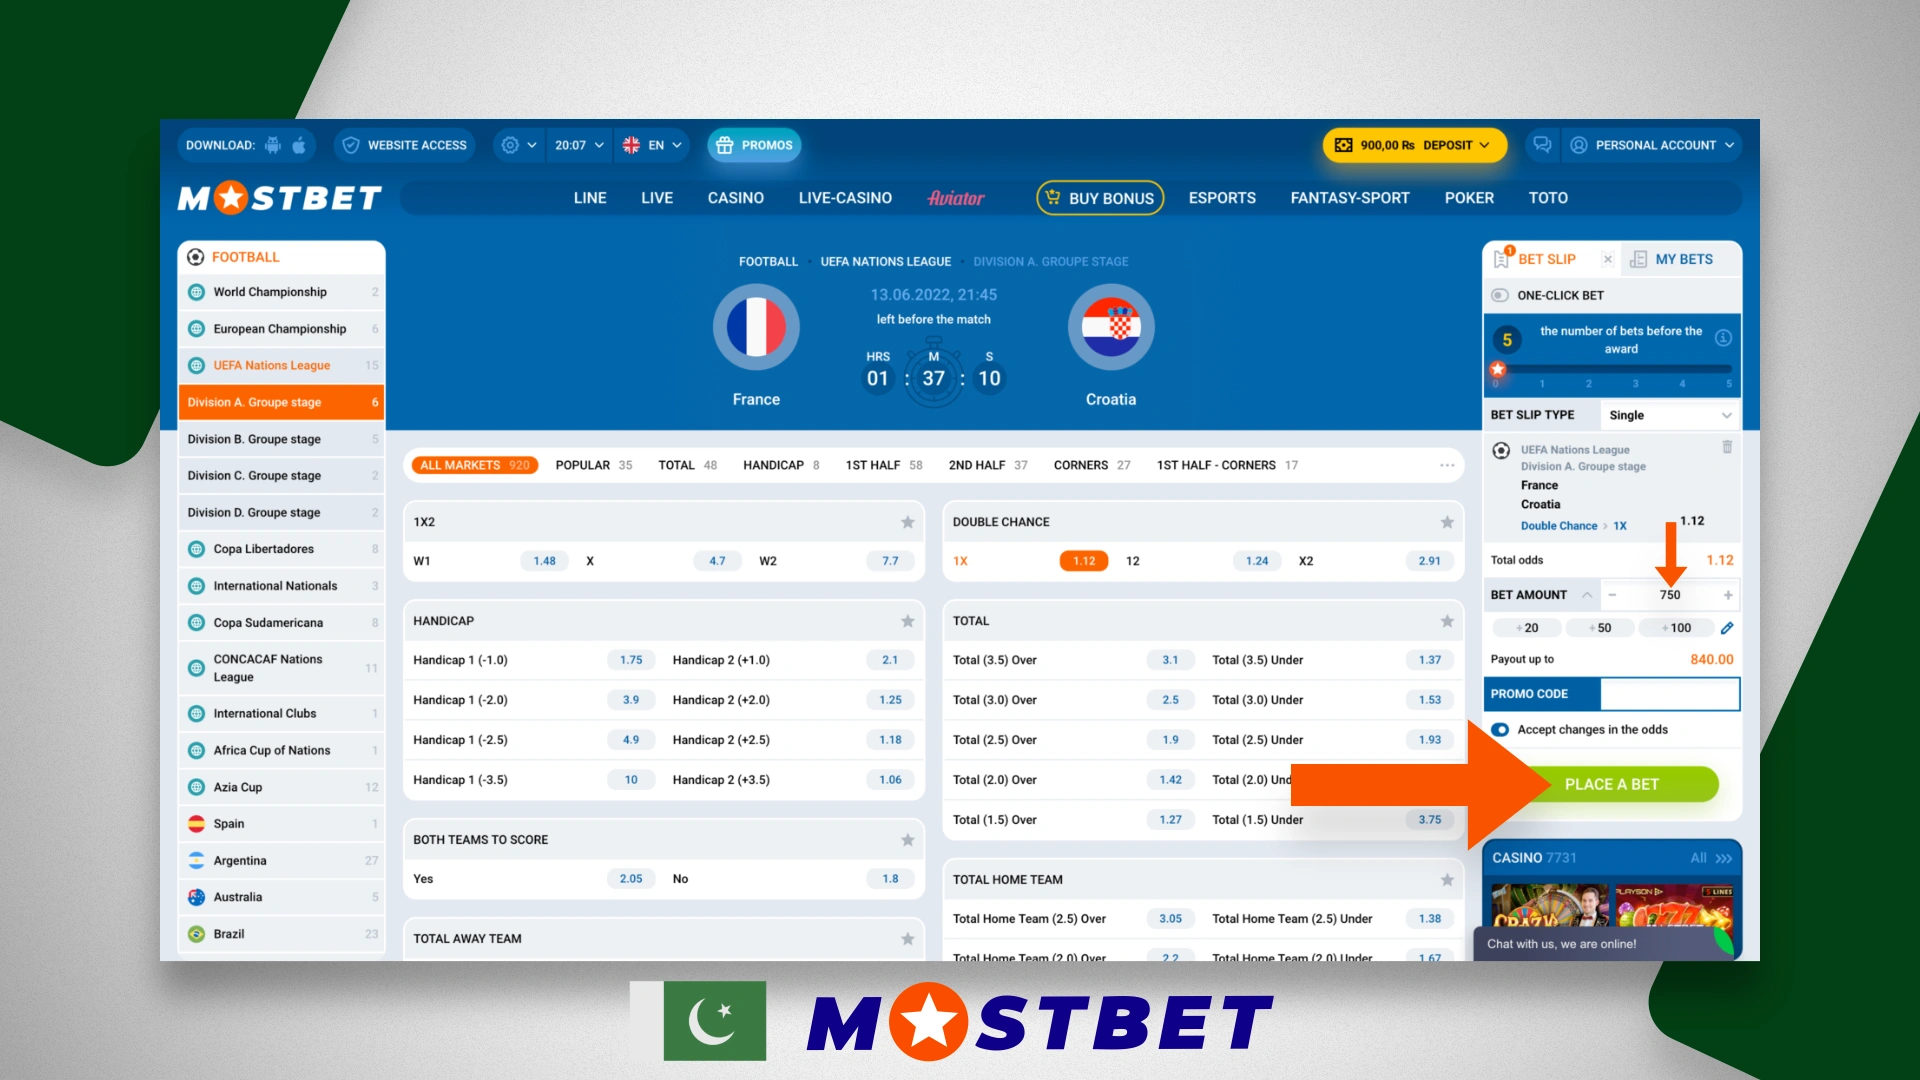 A step-by-step guide on how to bet at Mostbet from Pakistan